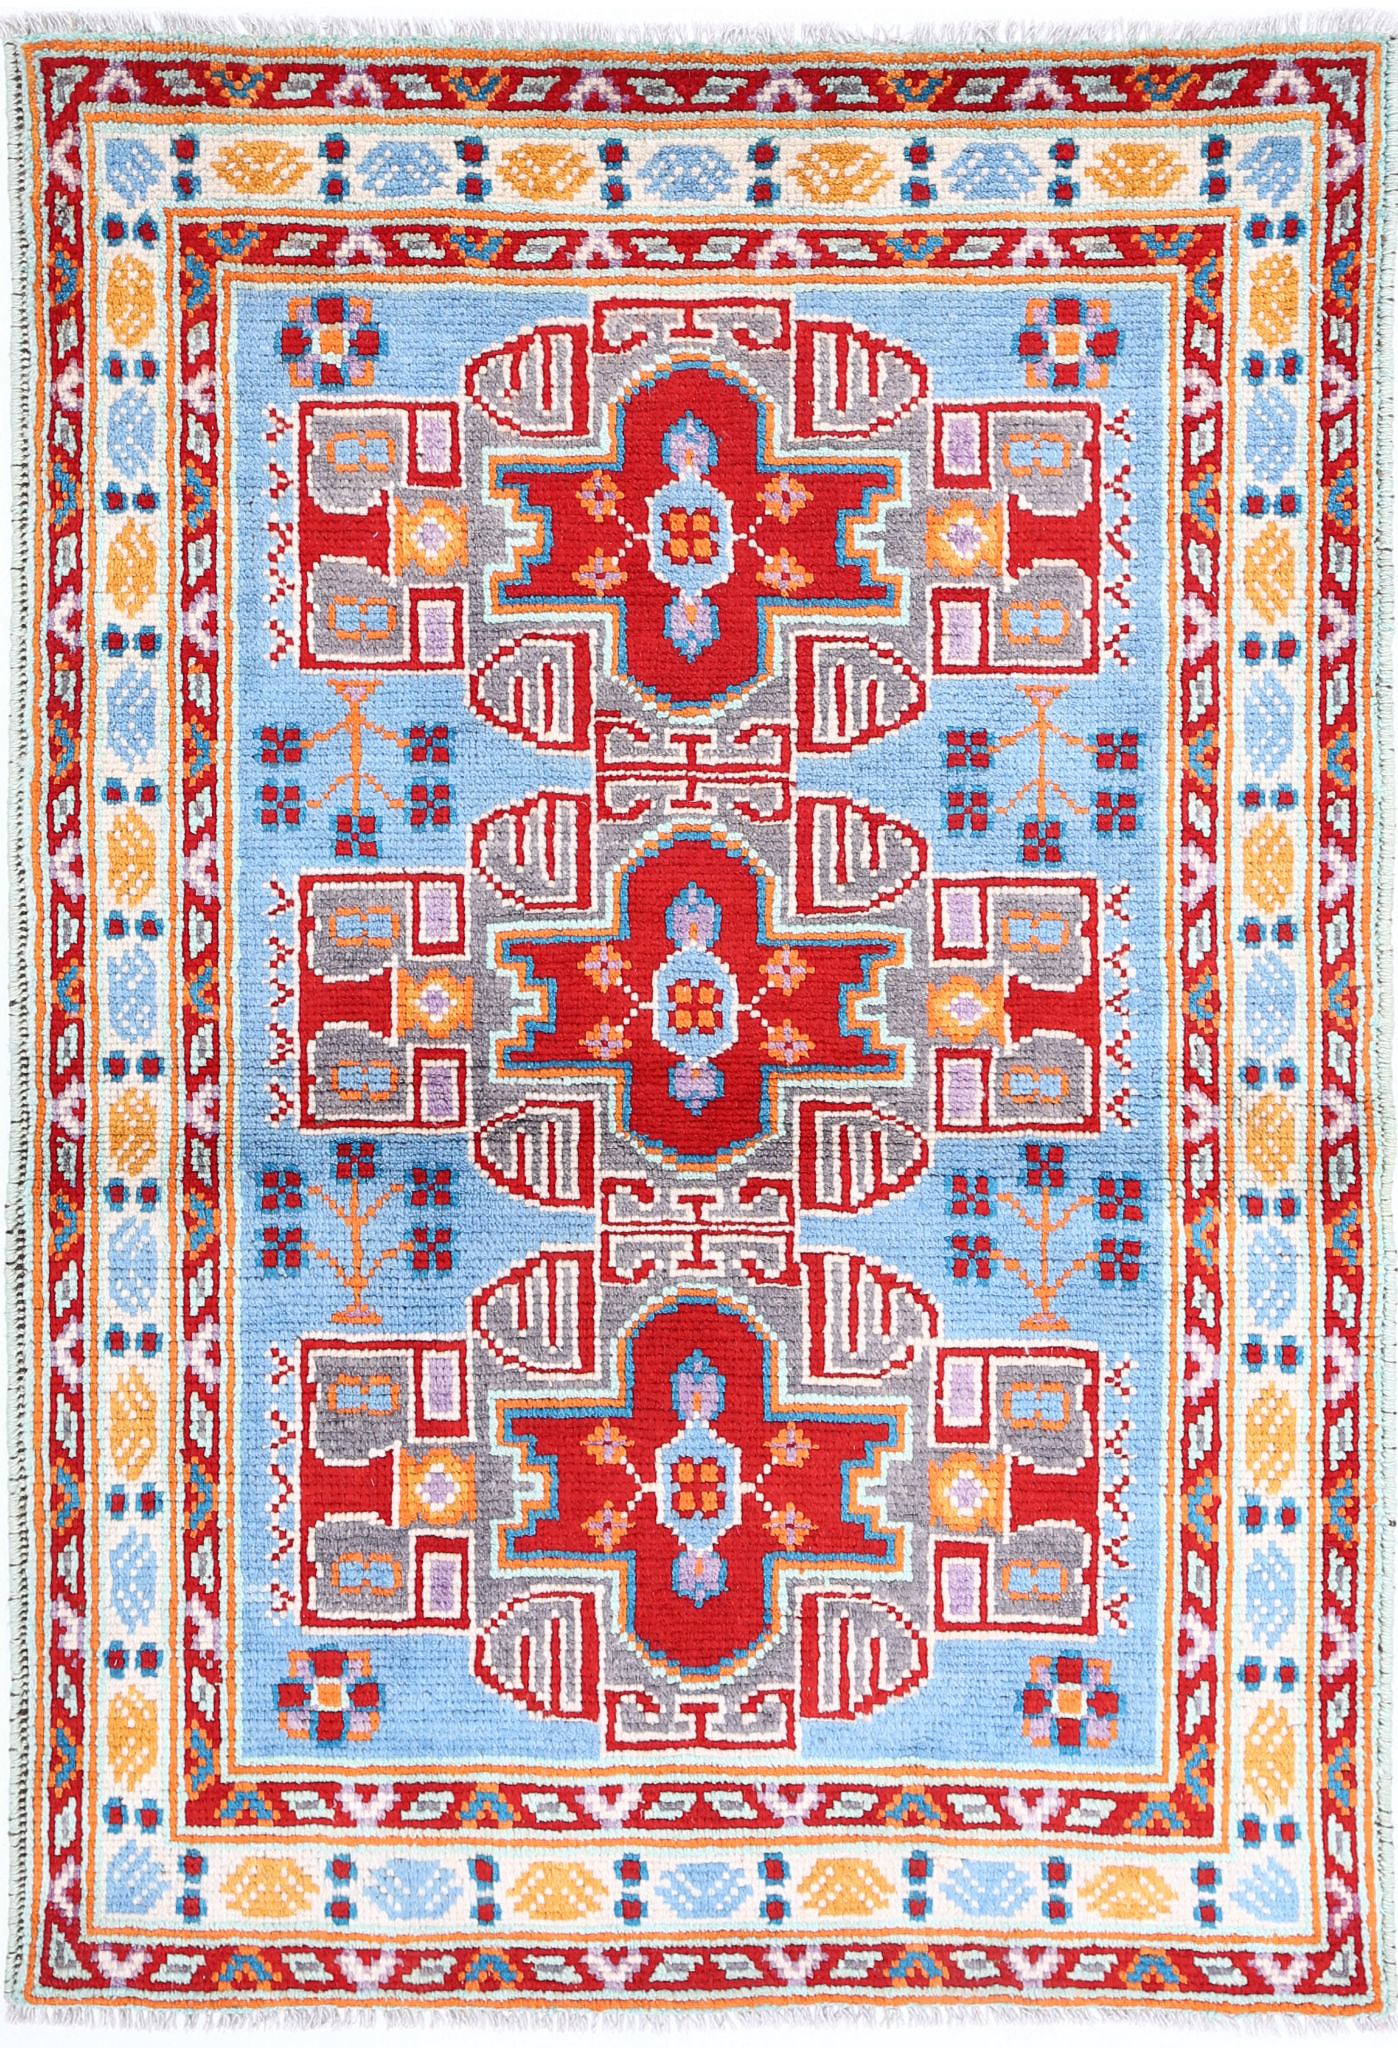 Revival-hand-knotted-qarghani-wool-rug-5014049.jpg